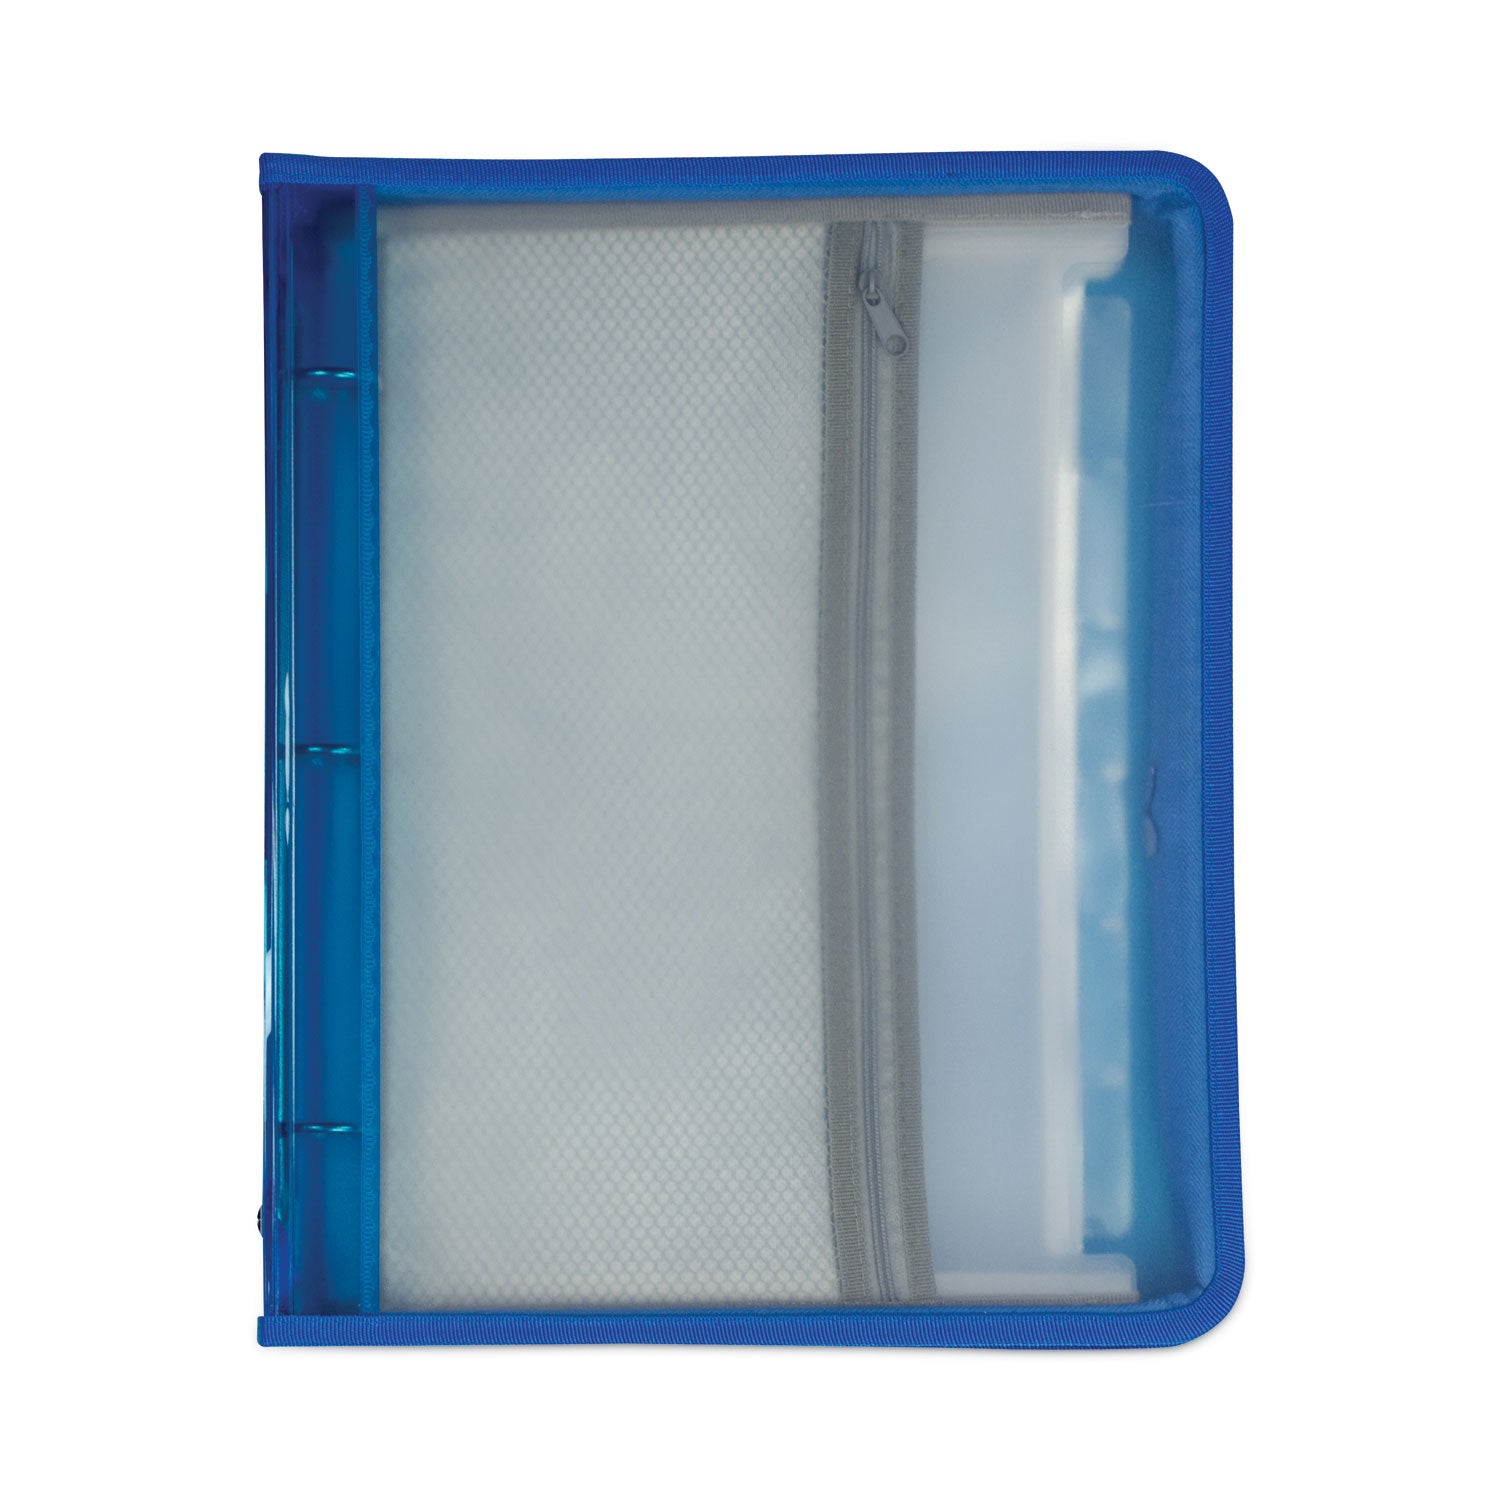 zippered-binder-with-expanding-file-2-expansion-7-sections-zipper-closure-1-6-cut-tabs-letter-size-bright-blue_cli48115 - 2